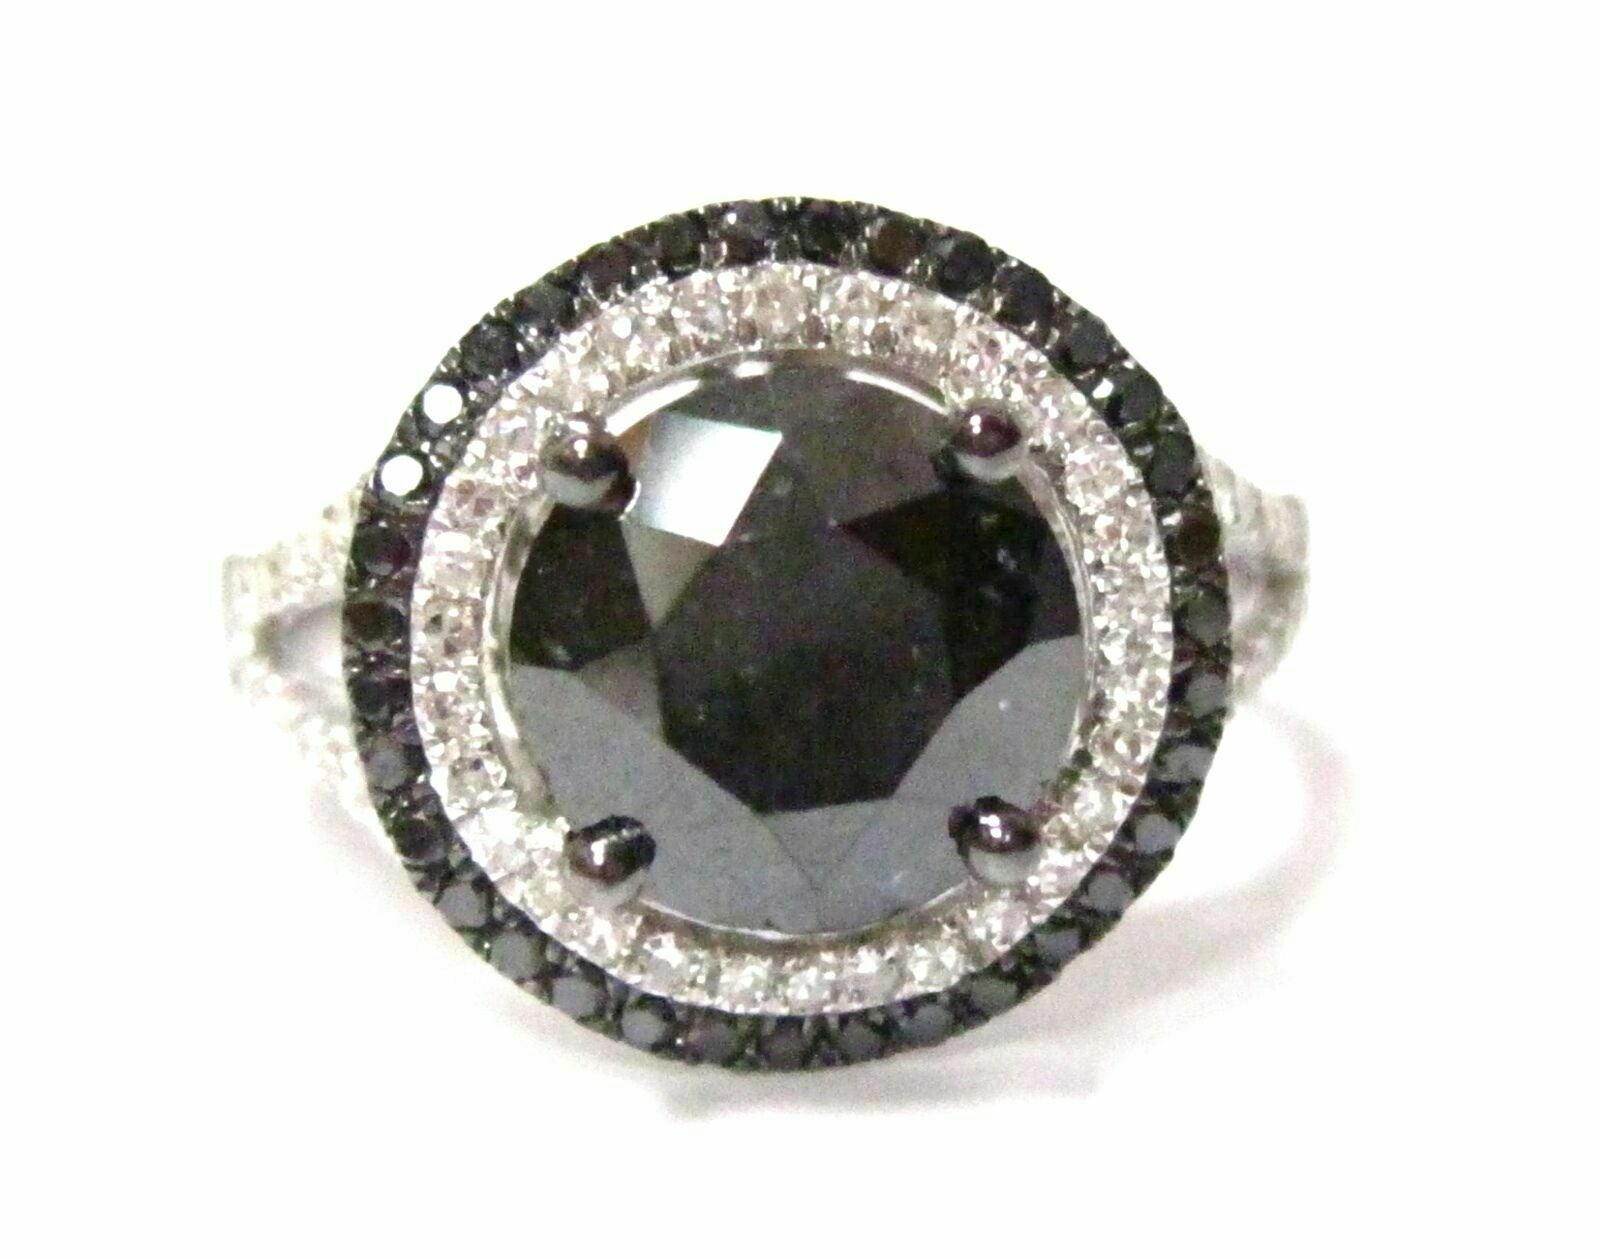 3.42 TCW Halo Natural Black Diamond Anniversary/Cocktail Ring Size 6.5 14k WGold